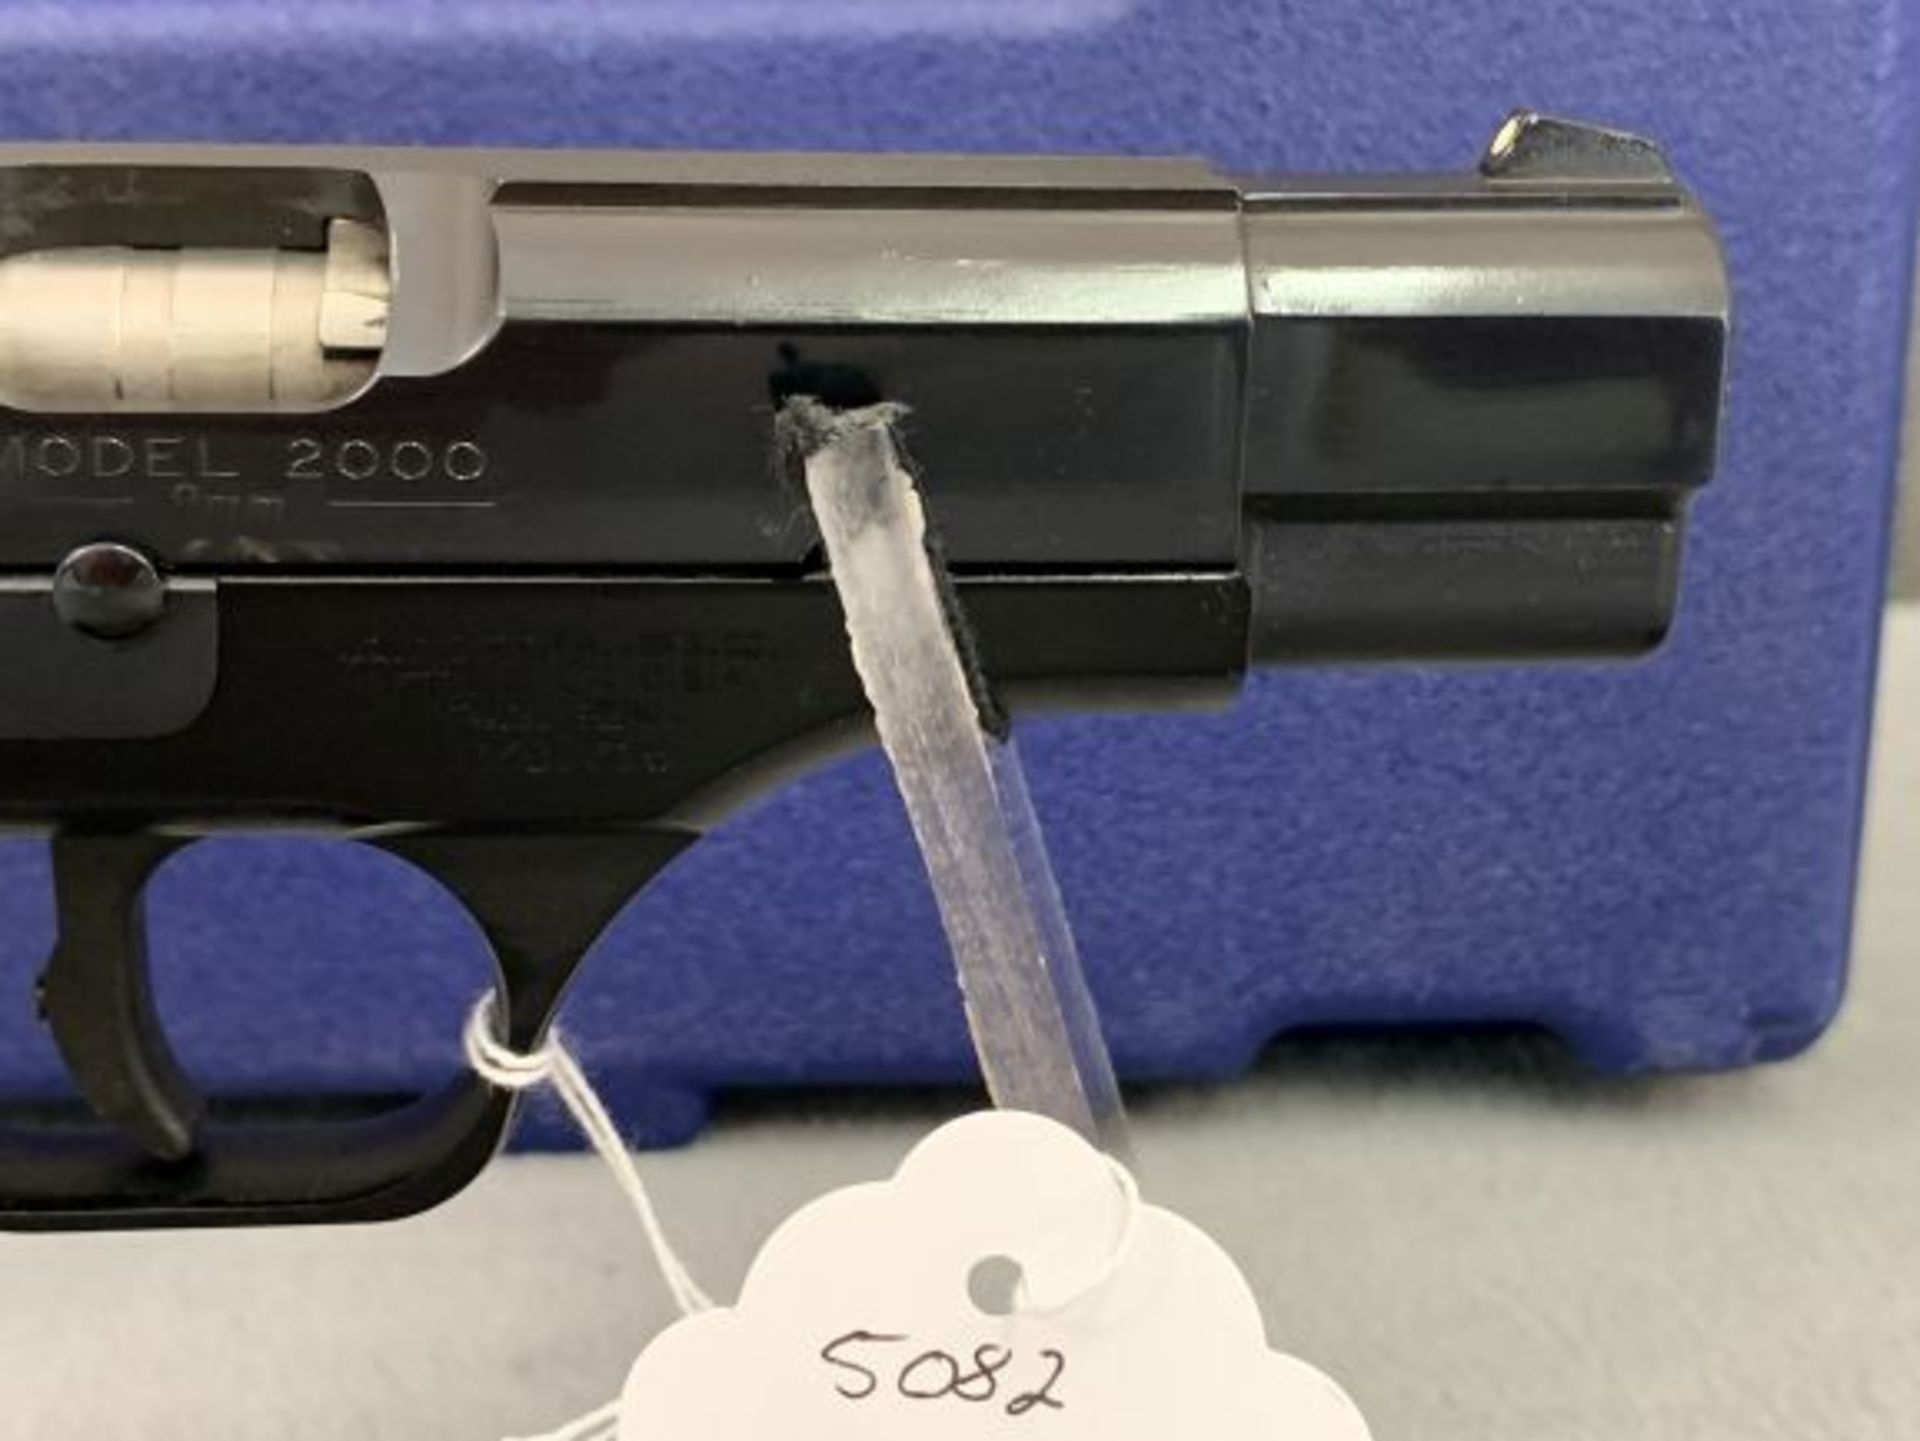 256. Colt All American Mod. 2000, 1st edition, 9mm, case, ex mag, SN:RK01716 - Image 9 of 13